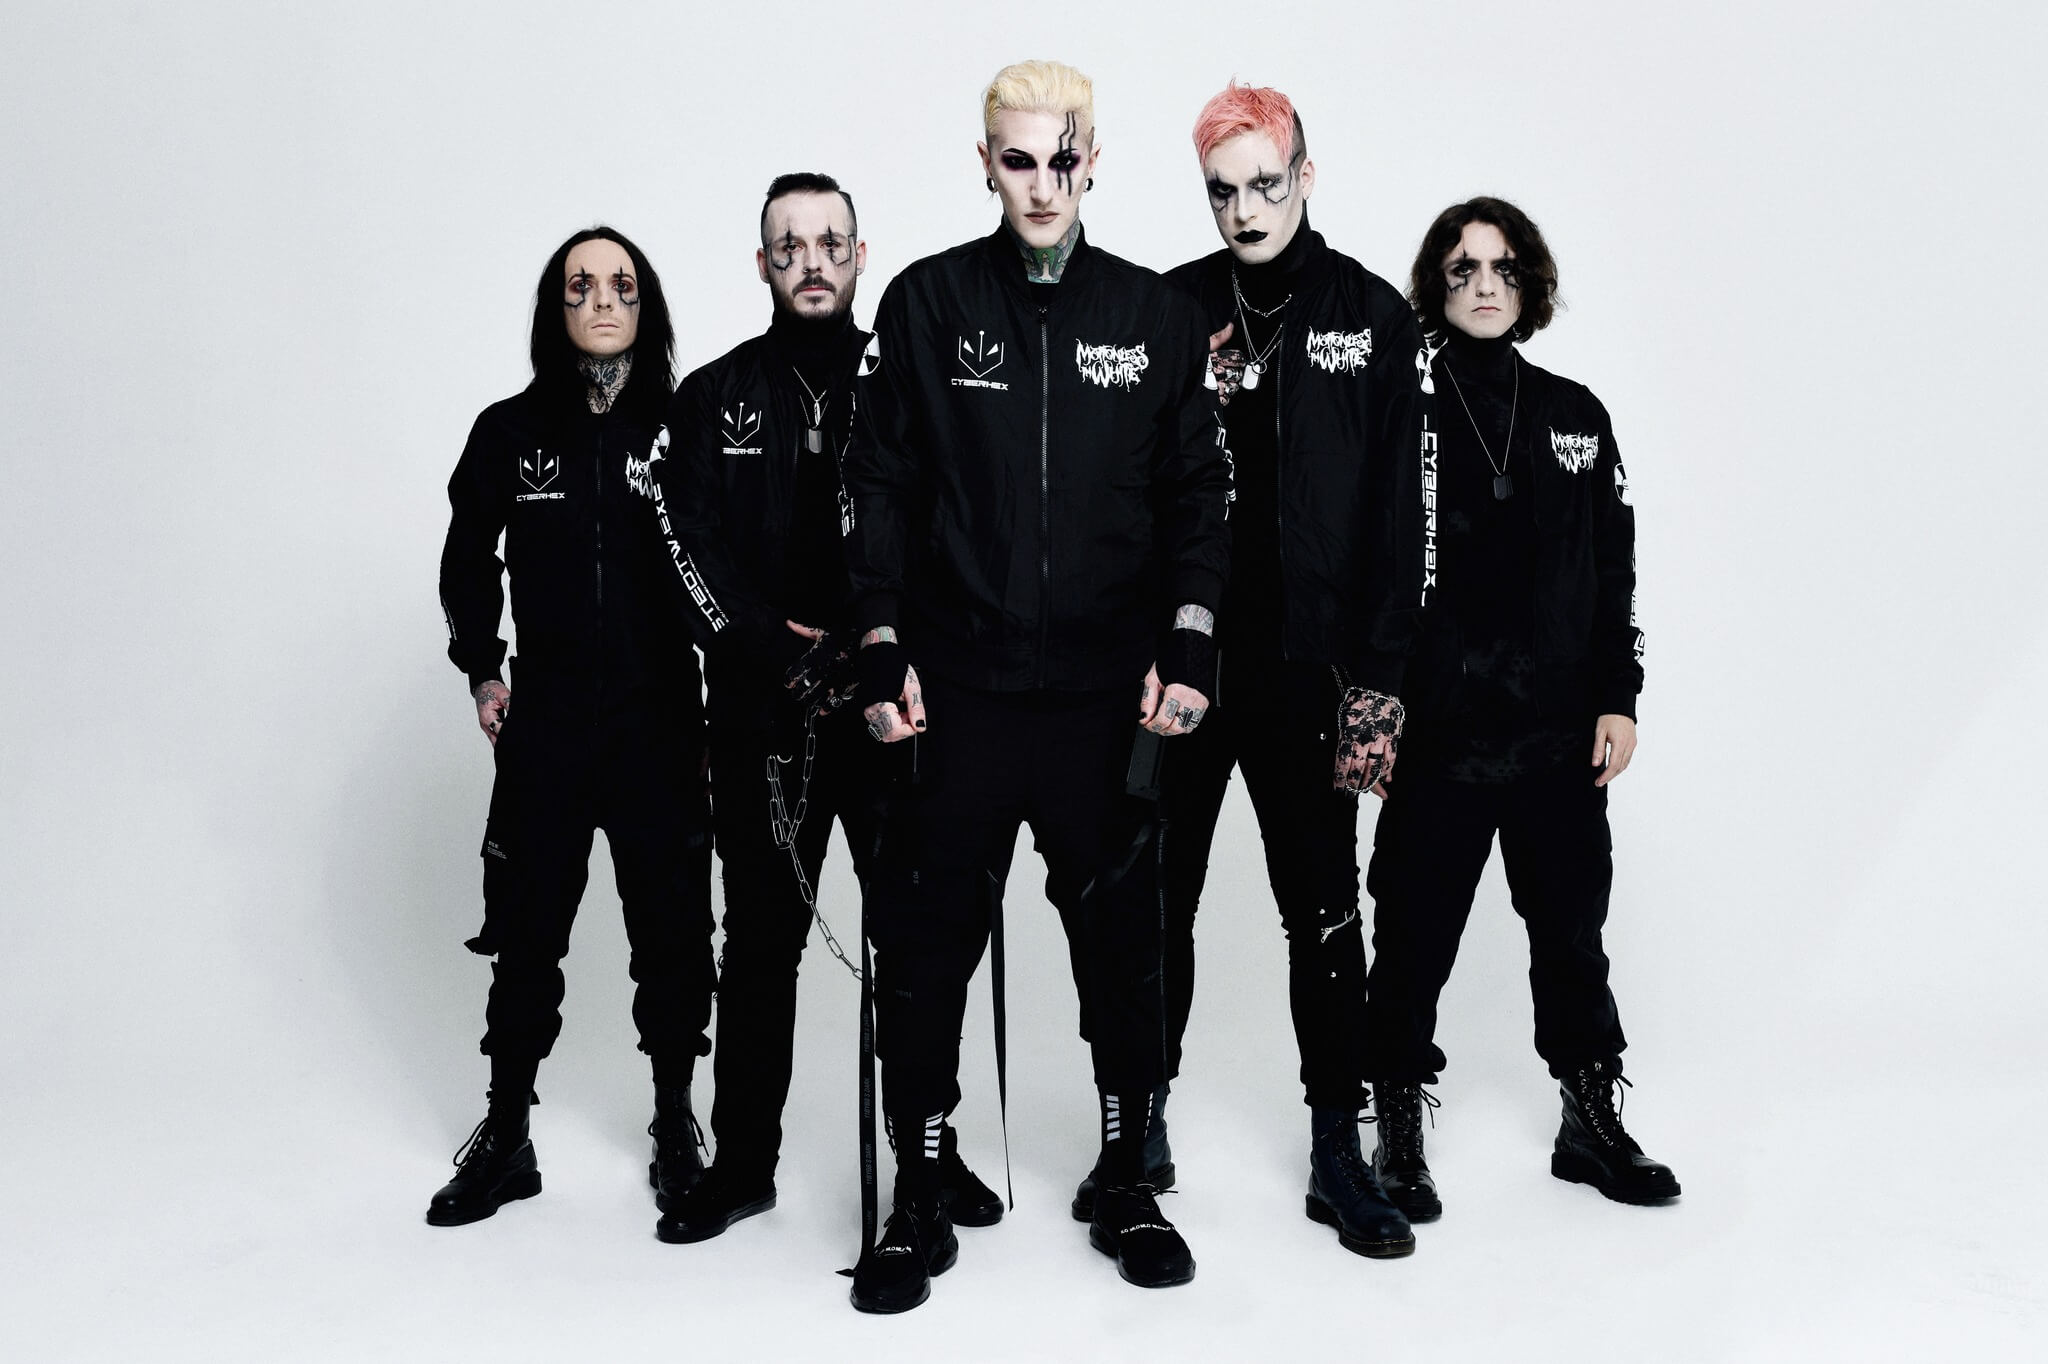 Motionless In White Debut “Cyberhex” + New Album Announcement